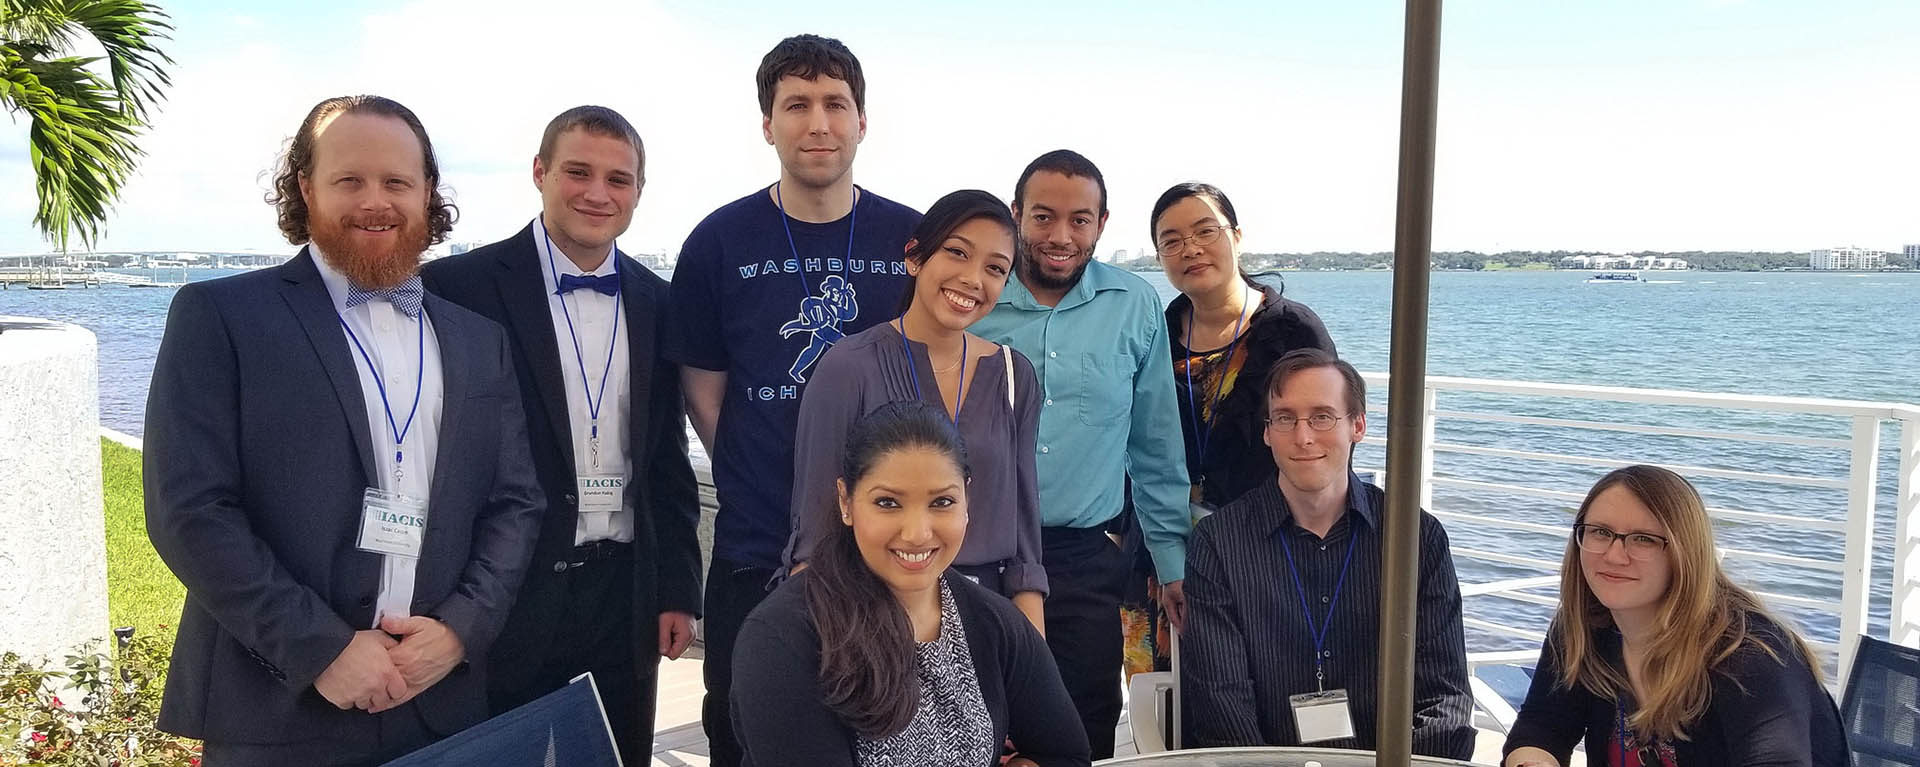 Students smile for a photo with an ocean view behind them while attending a conference.